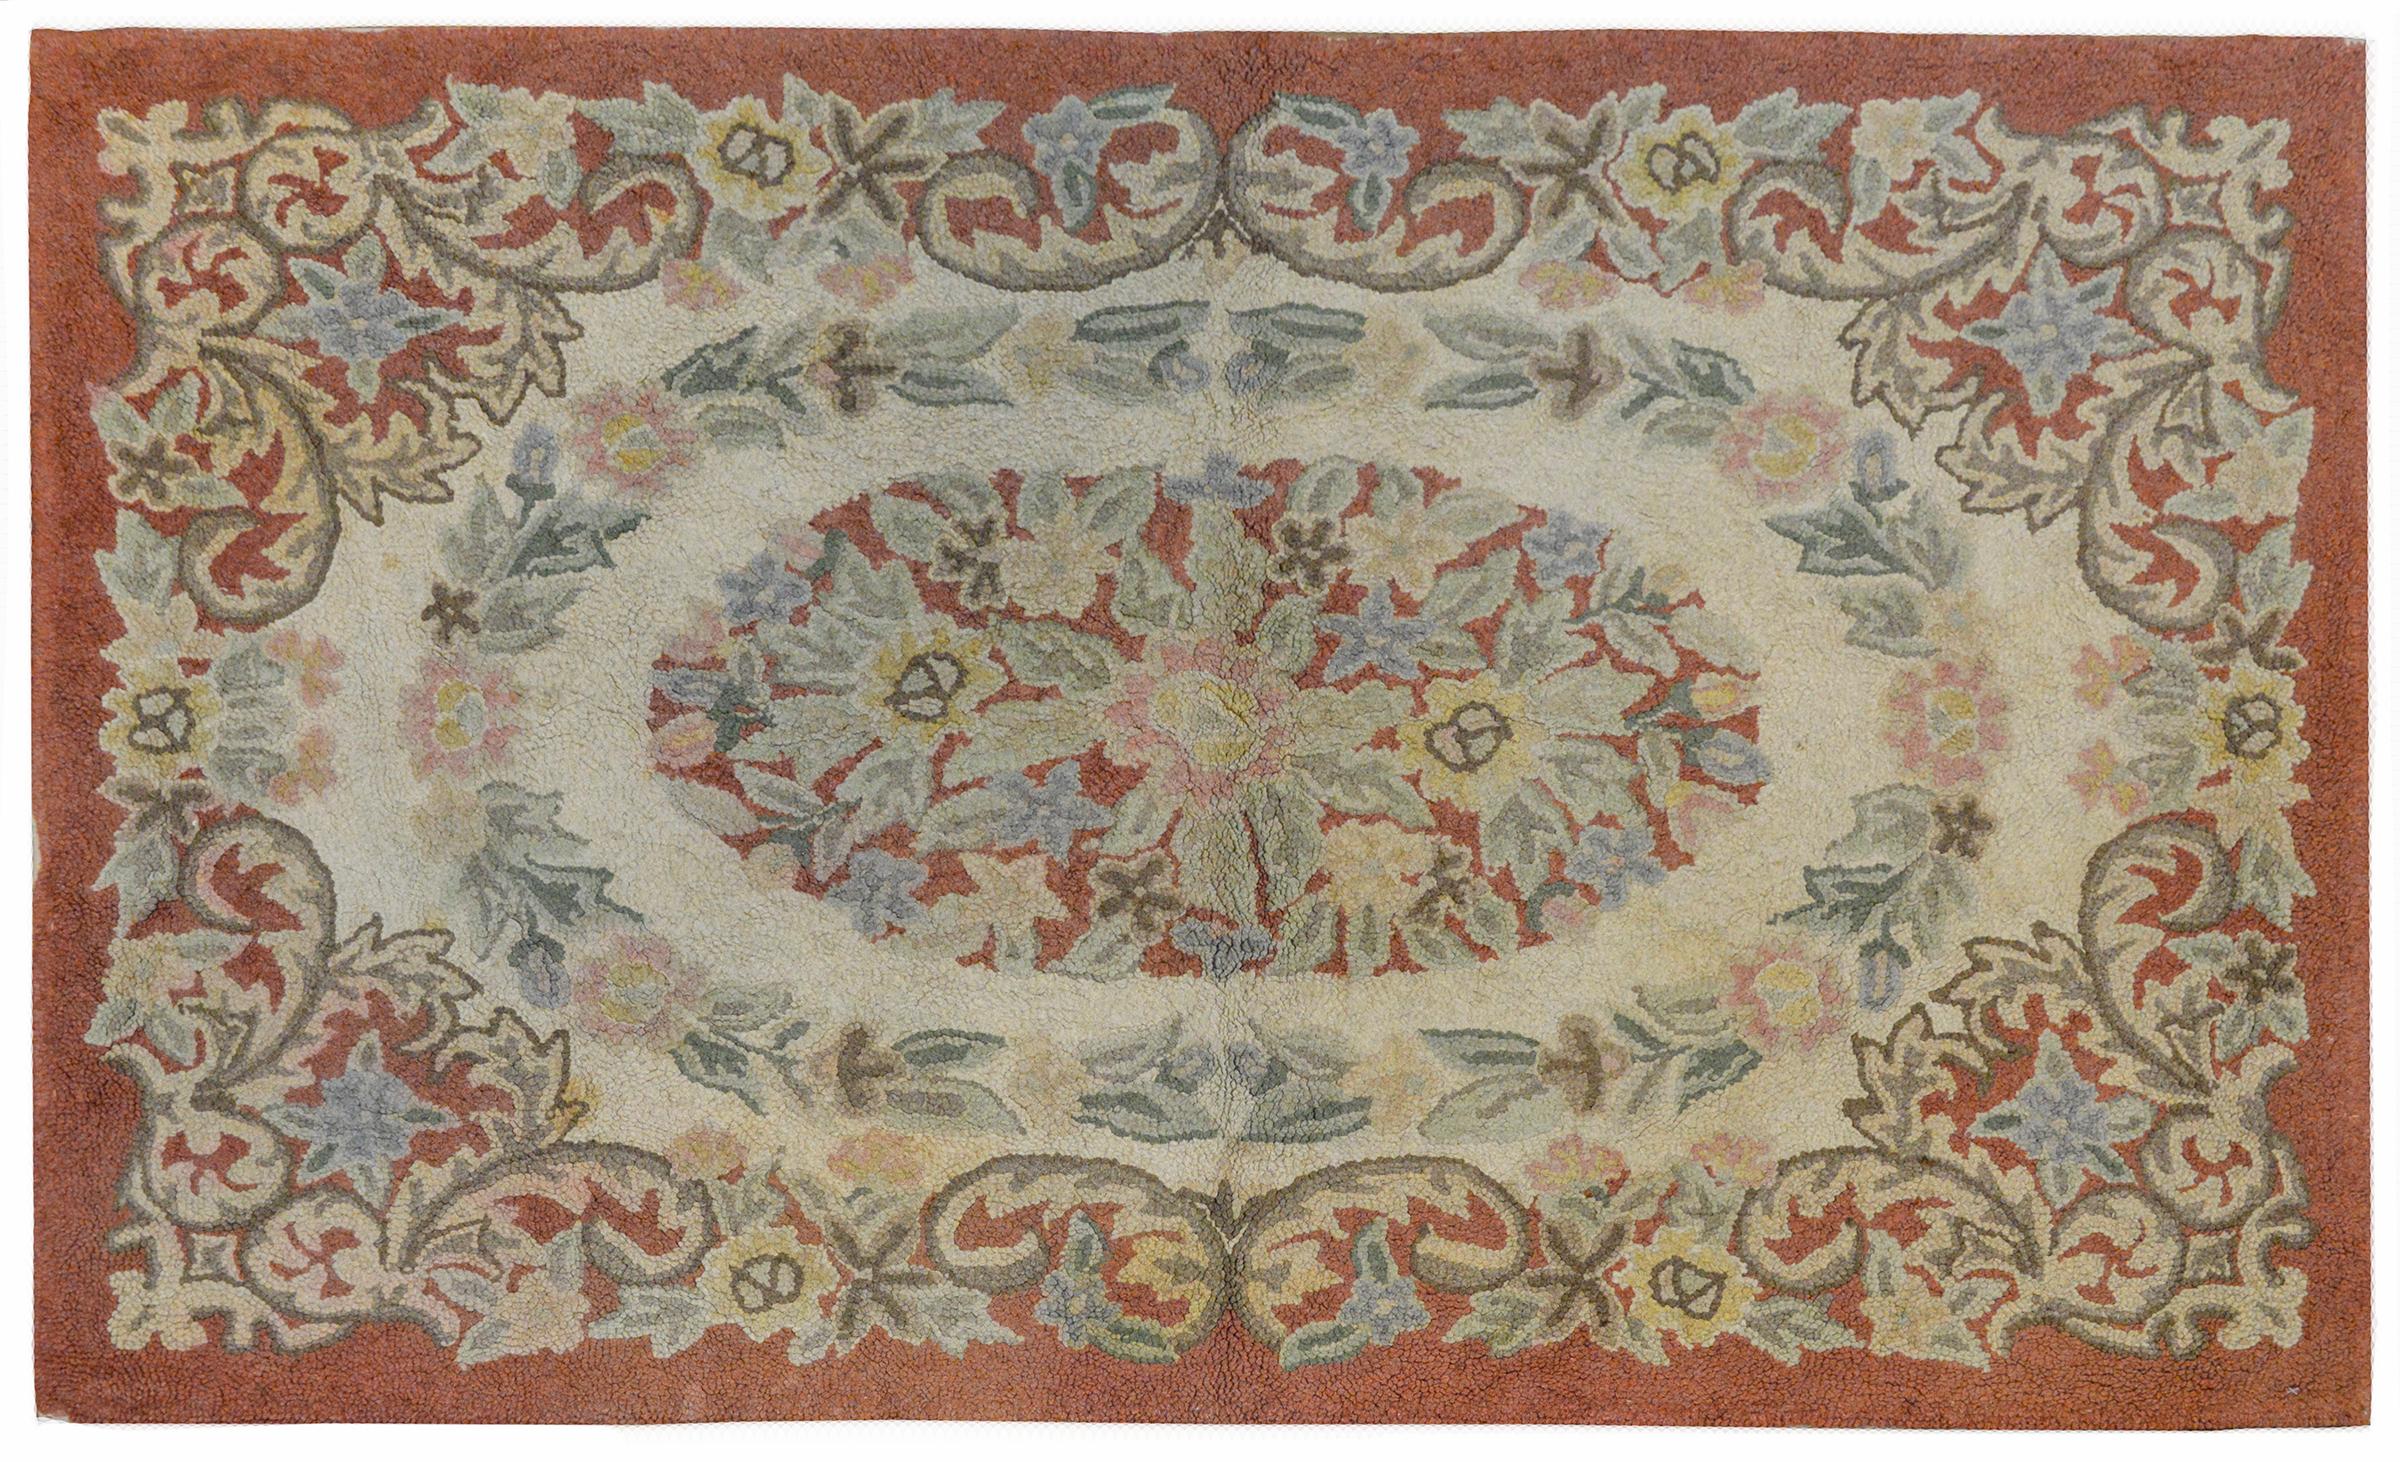 A beautiful 20th century Chinese hook rug with a wonderful floral pattern arranged in multiple ovals and rings of flowers and leaves, all woven in muted indigos, greens, yellows, and pinks on a muted red ground.